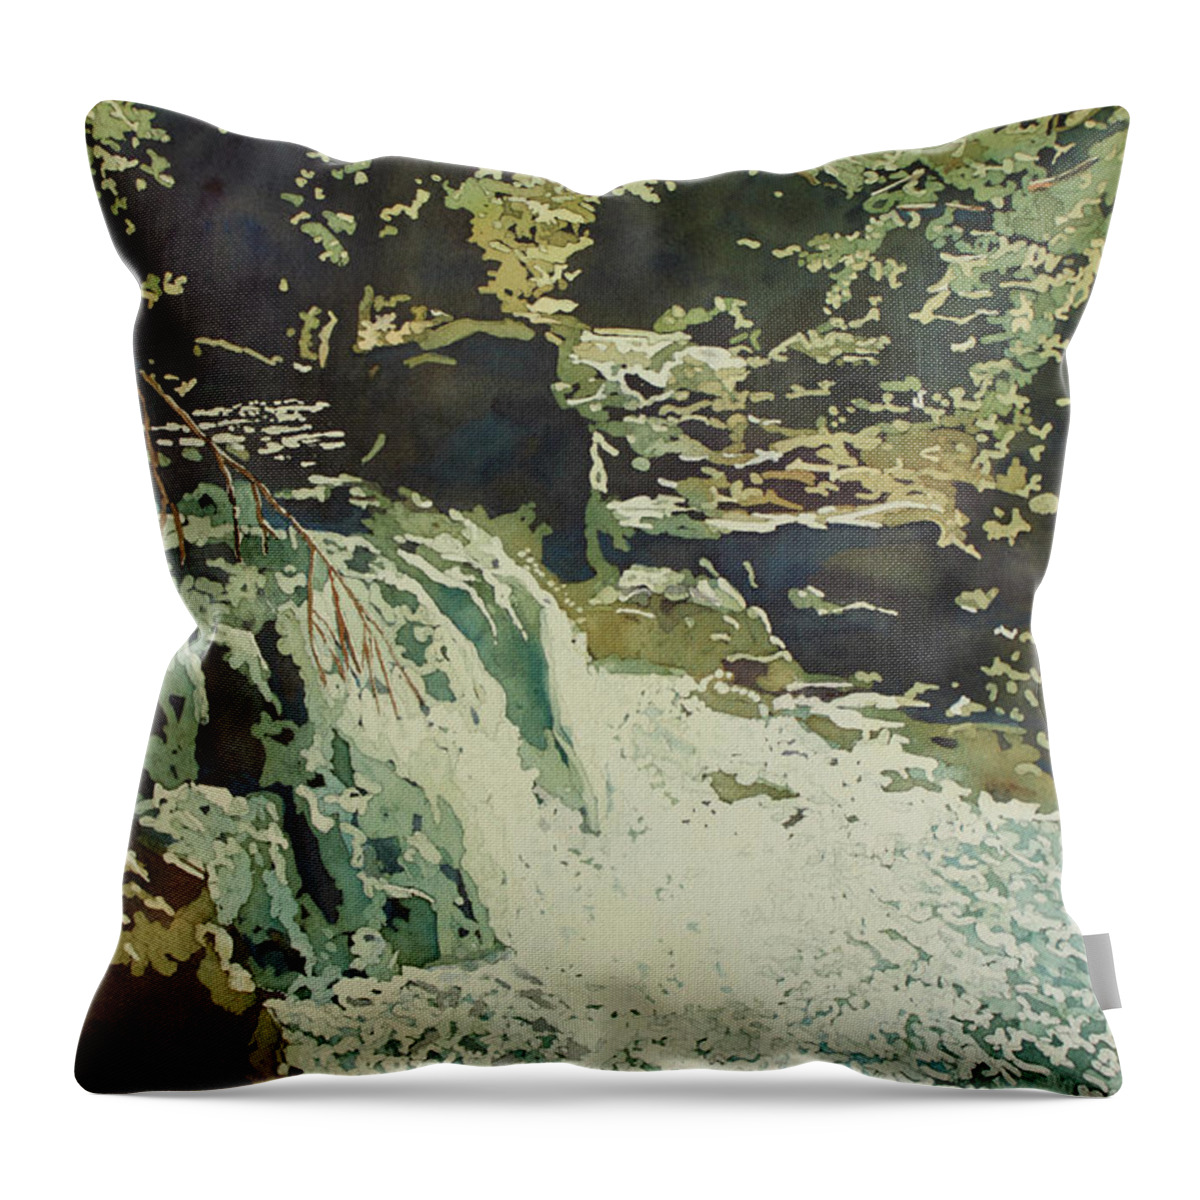 Waterfall Throw Pillow featuring the painting Aqua Falls by Jenny Armitage